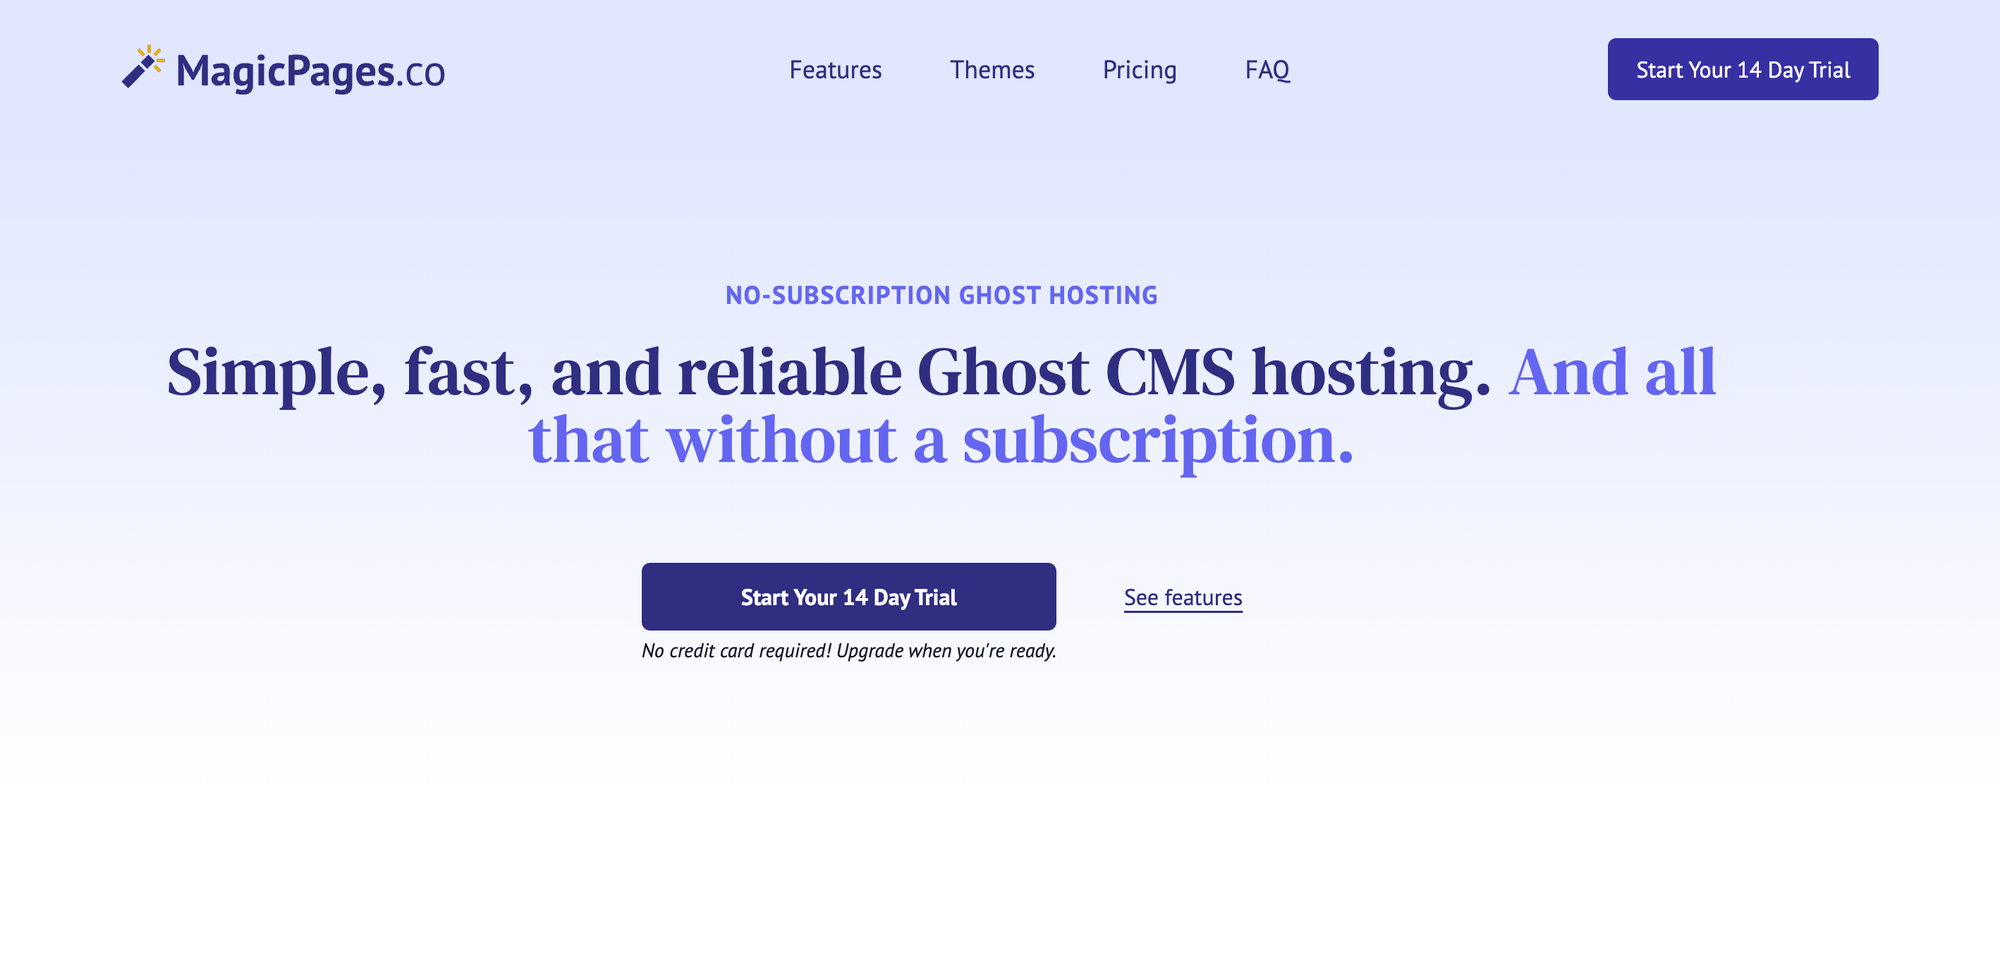 MagicPages.co - Ghost Hosting ohne Abo